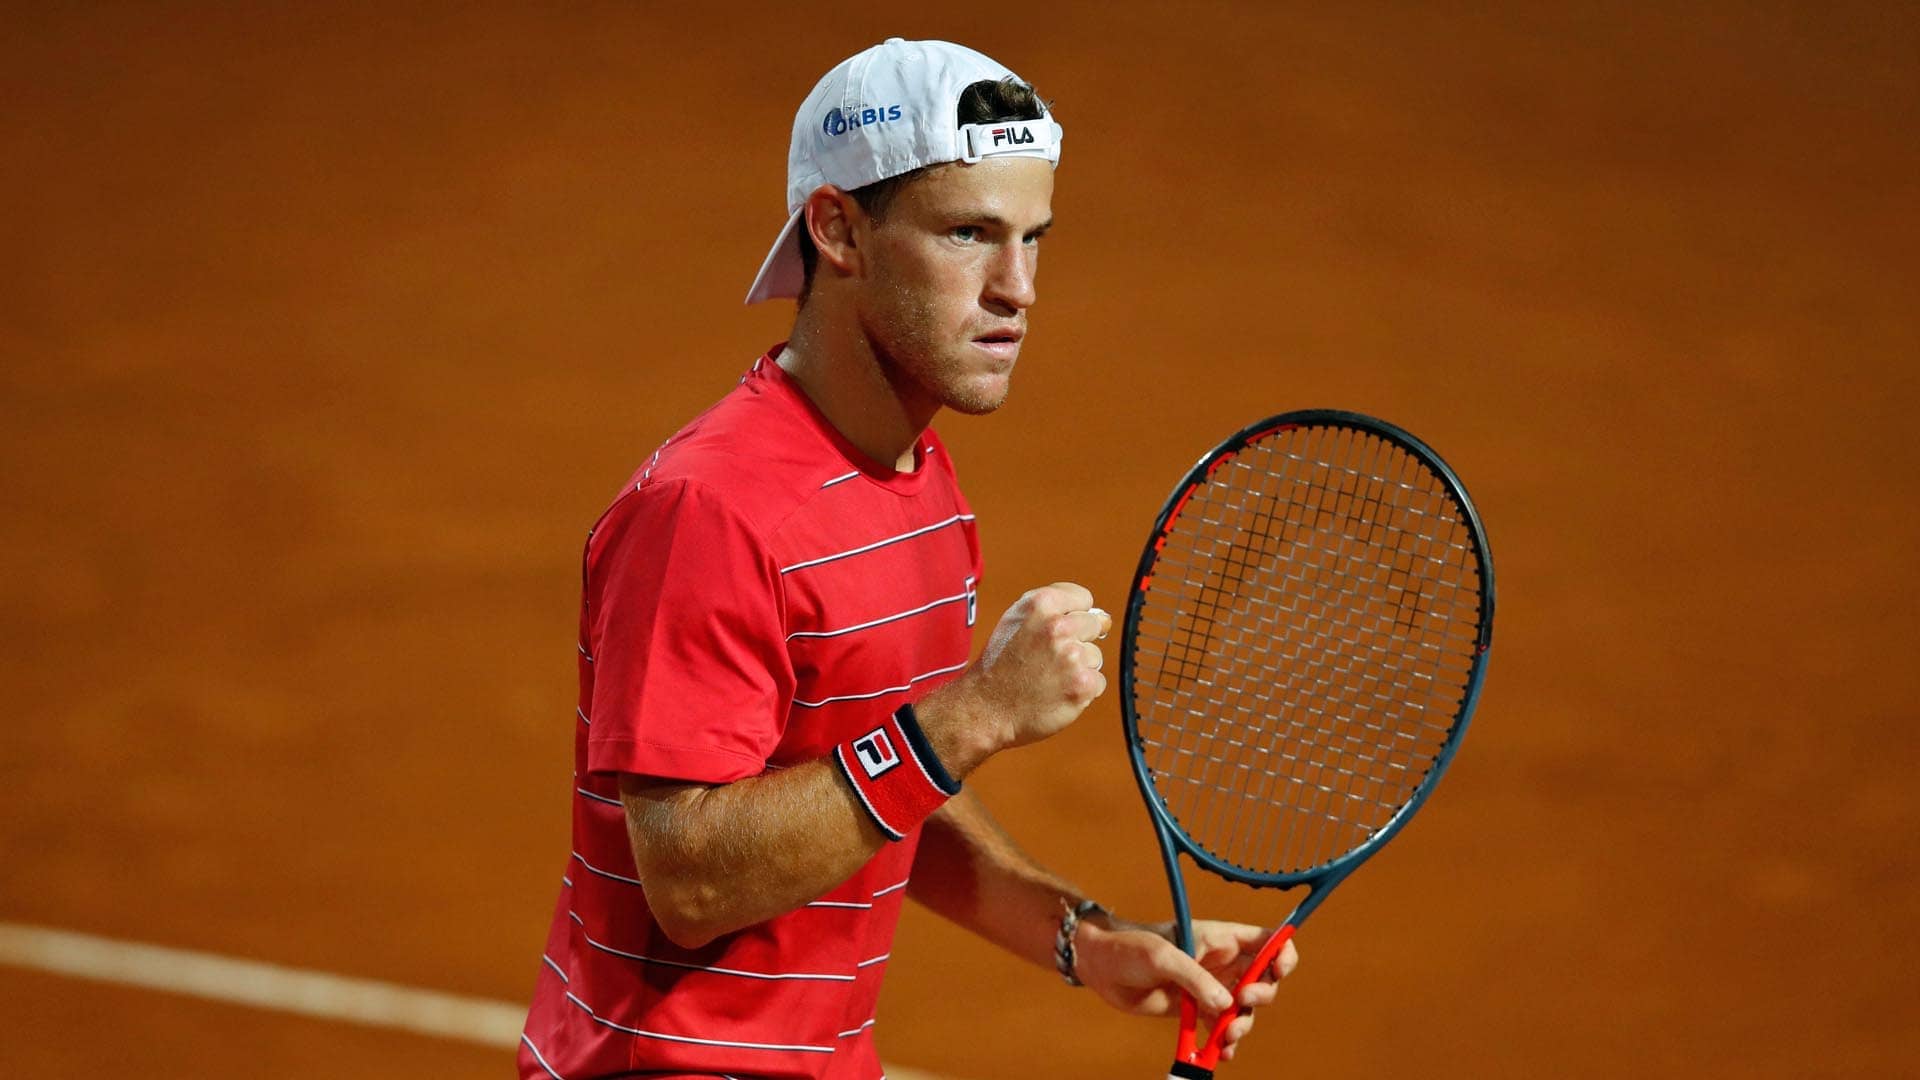 Home Hope Diego Schwartzman Leads Cordoba Field When Is The Draw and More ATP Tour Tennis